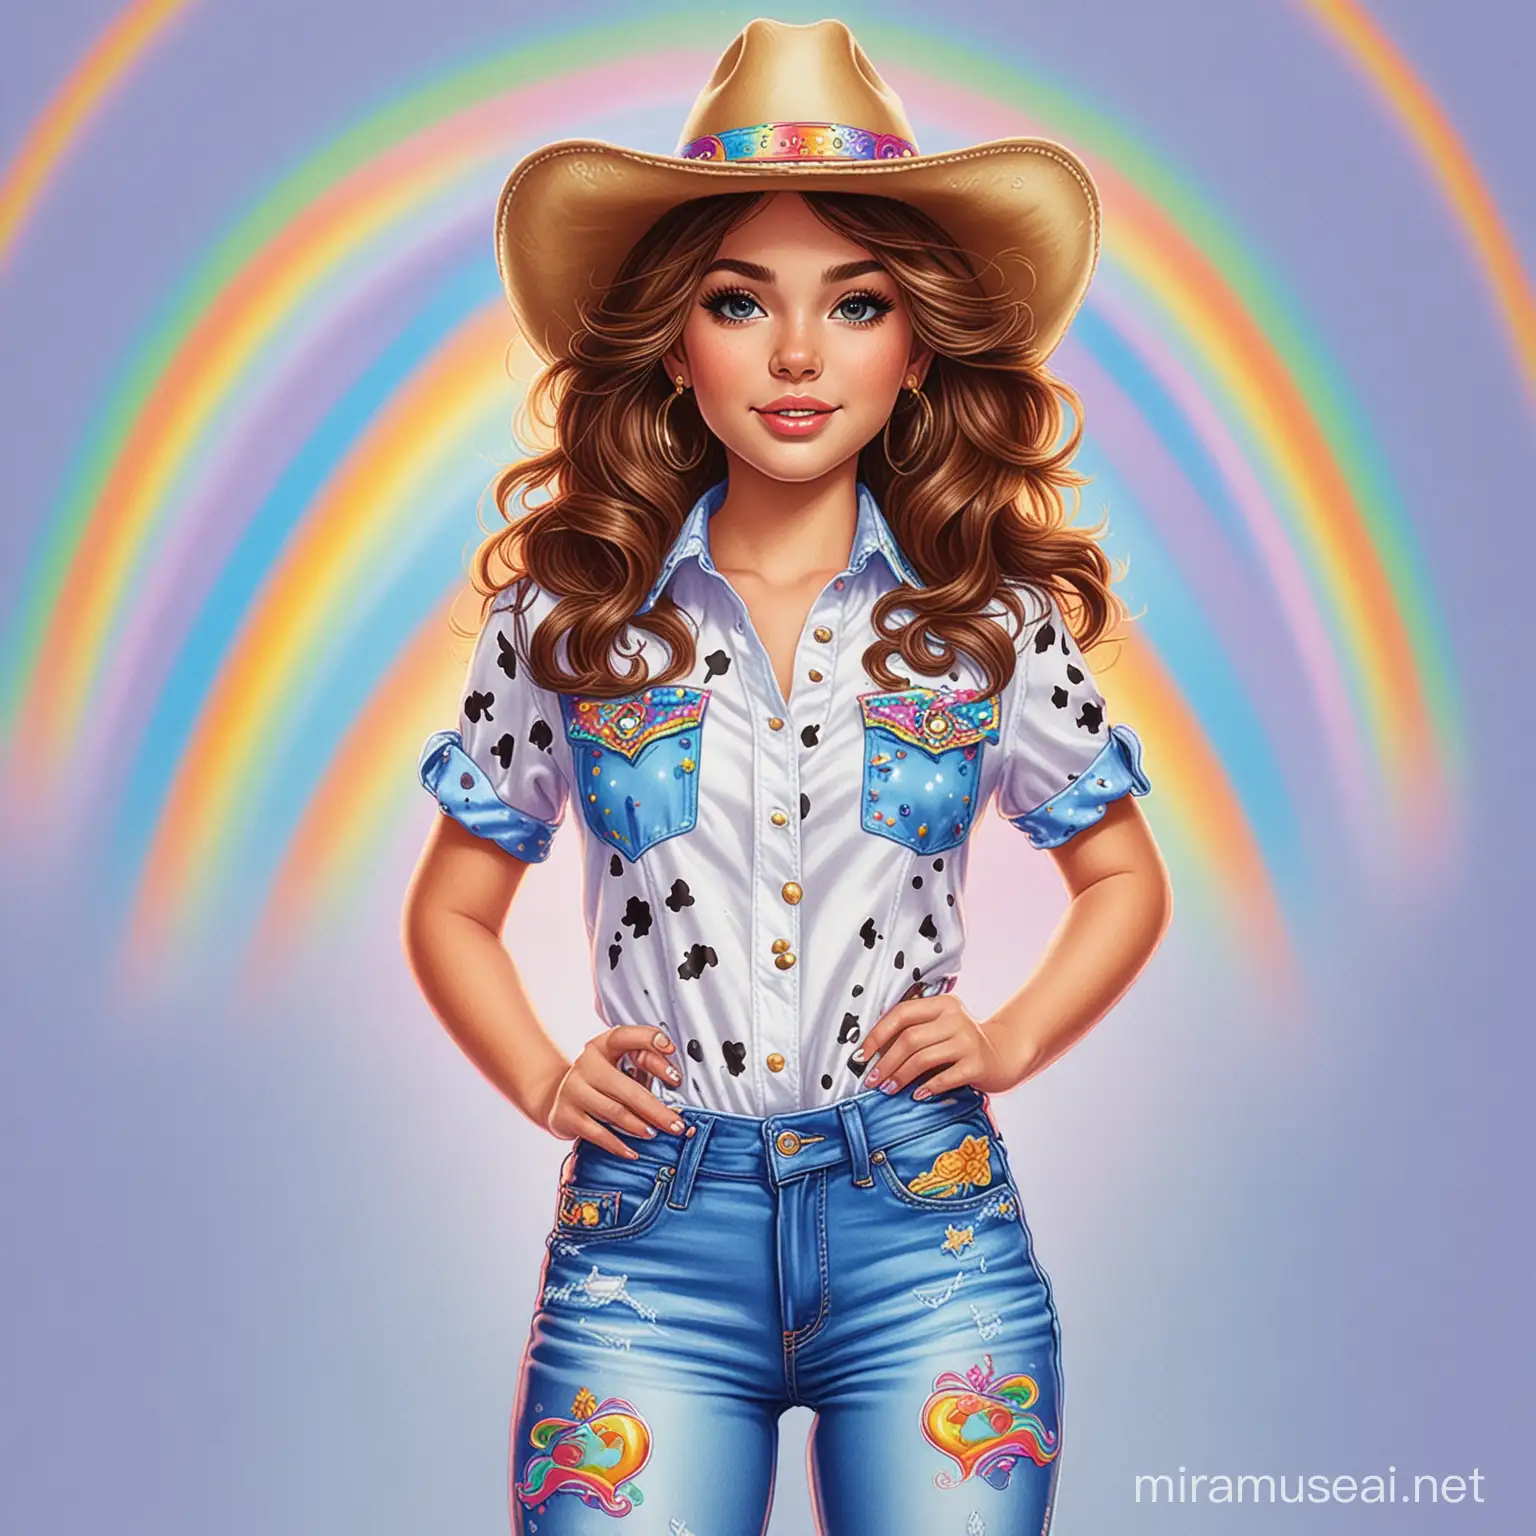 LISA FRANK INSPIRED CARTOON ILLUSTRATION OF A BROWN HAIRED GIRL, STANDING WEARING A BLUE AND COW PRINT COWBOY HAT , SHE IS WEARING A WHITE SHIRT AND JEANS WITH RAINBOW COWBOY BOOTS IN THE ART OF LISA FRANK